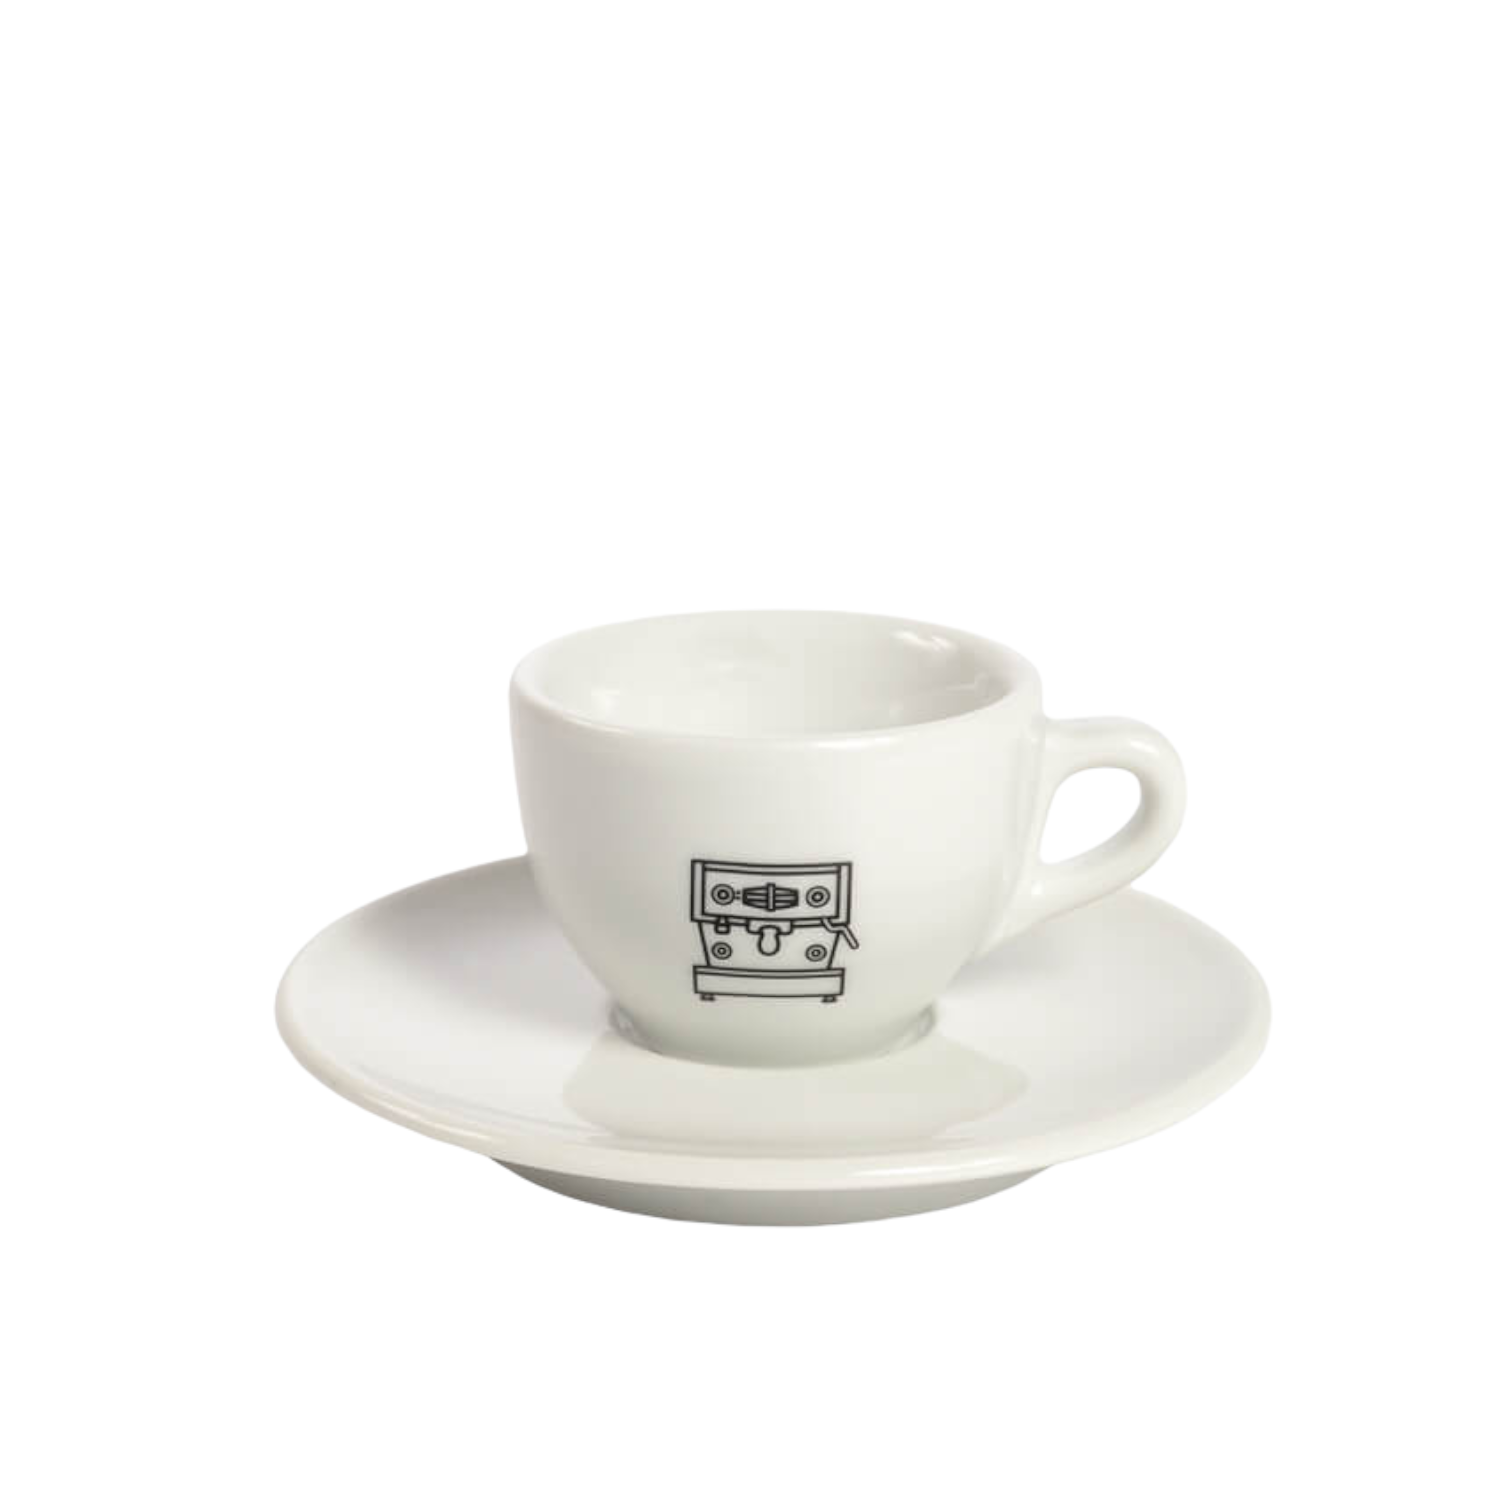 Linea Mini Coffee Cup and saucer by La Marzocco